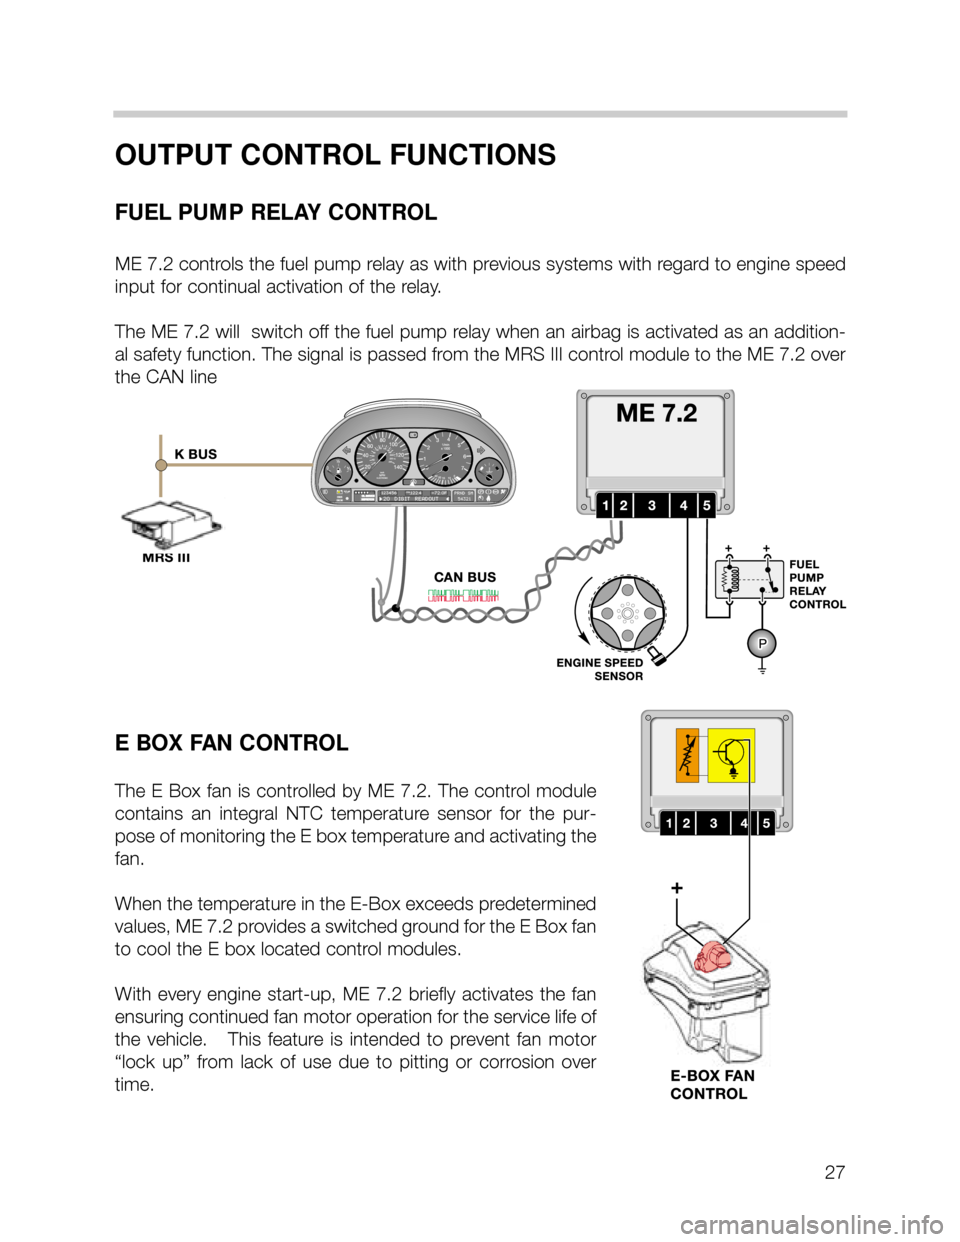 BMW X5 2001 E53 M62TU Engine Workshop Manual 27
OUTPUT CONTROL FUNCTIONS
FUEL PUMP RELAY CONTROL
ME 7.2 controls the fuel pump relay as with previous systems with regard to engine speed
input for continual activation of the relay.  
The ME 7.2 w